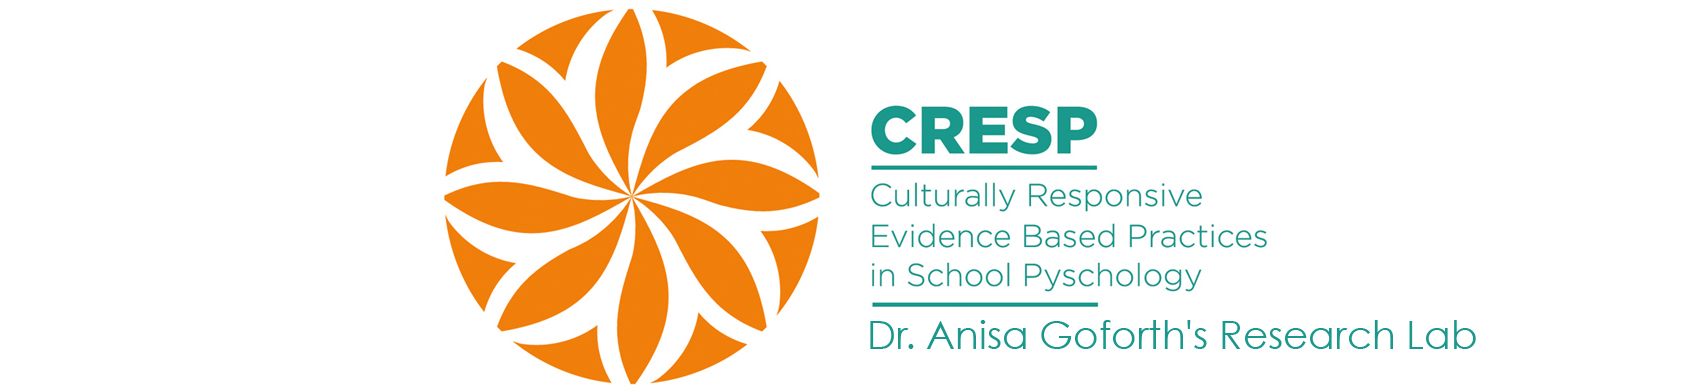 culturally resonsive evidence dabsed paractices in school psychology Dr. Anisa Goforth's reseach lab